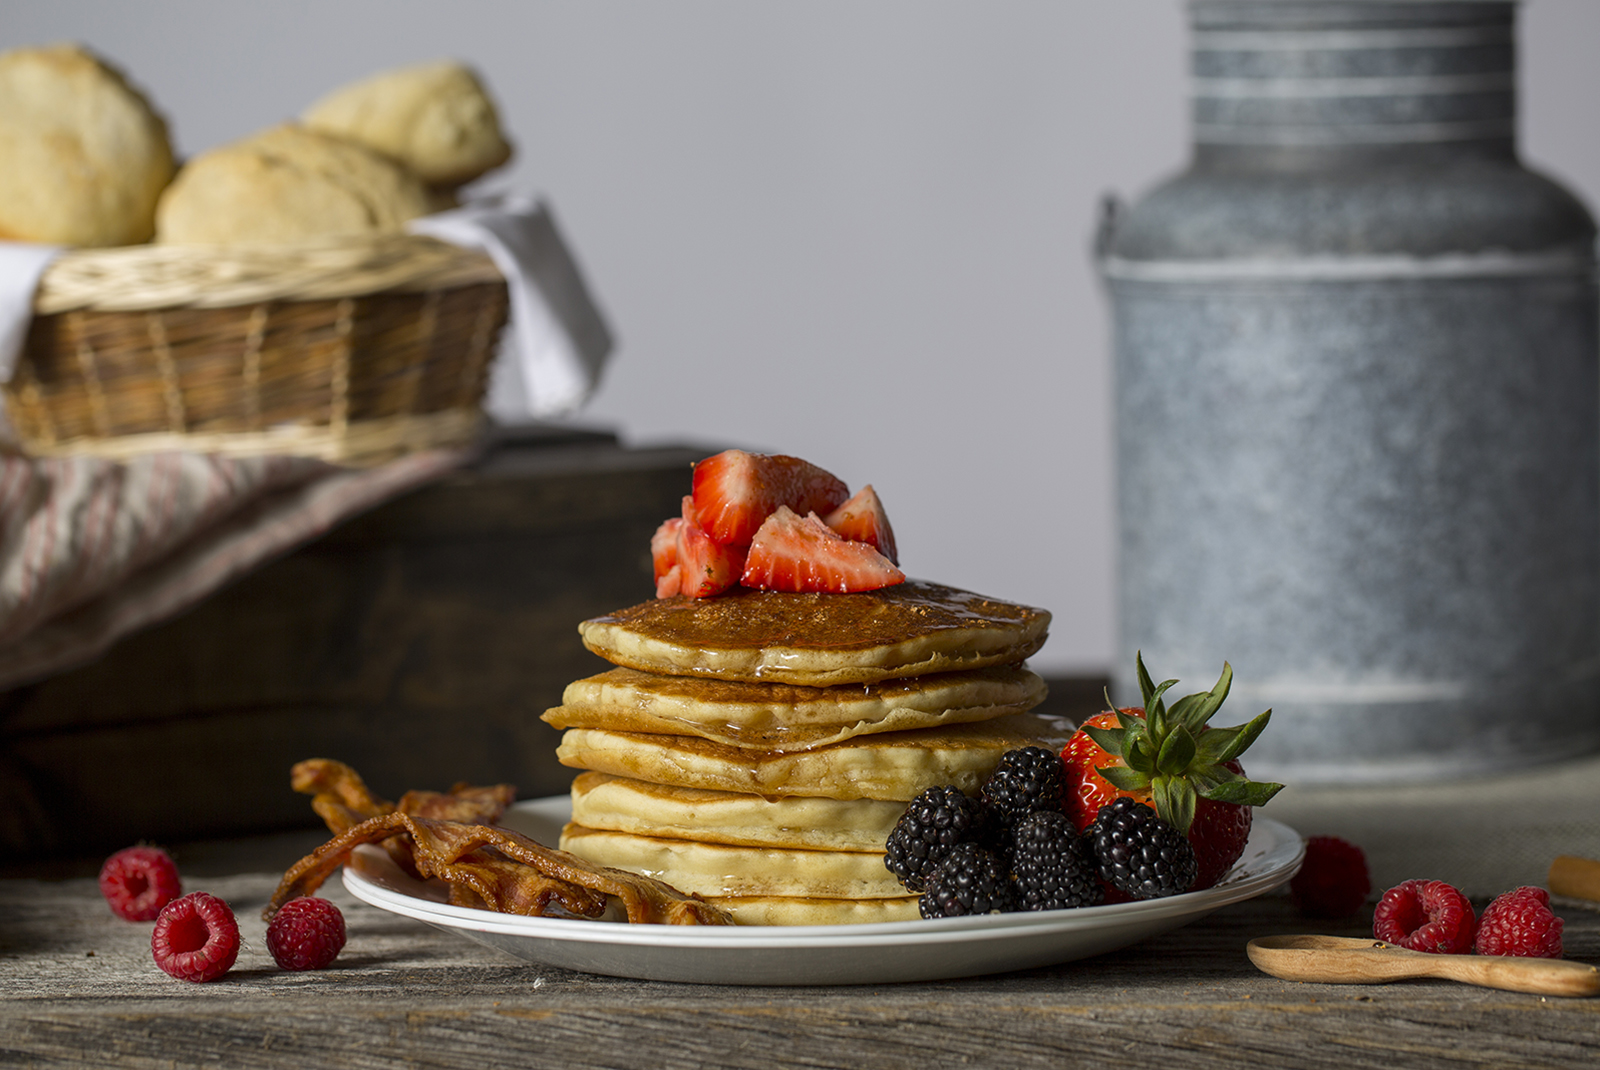 Studio photography of pancakes for a catalog